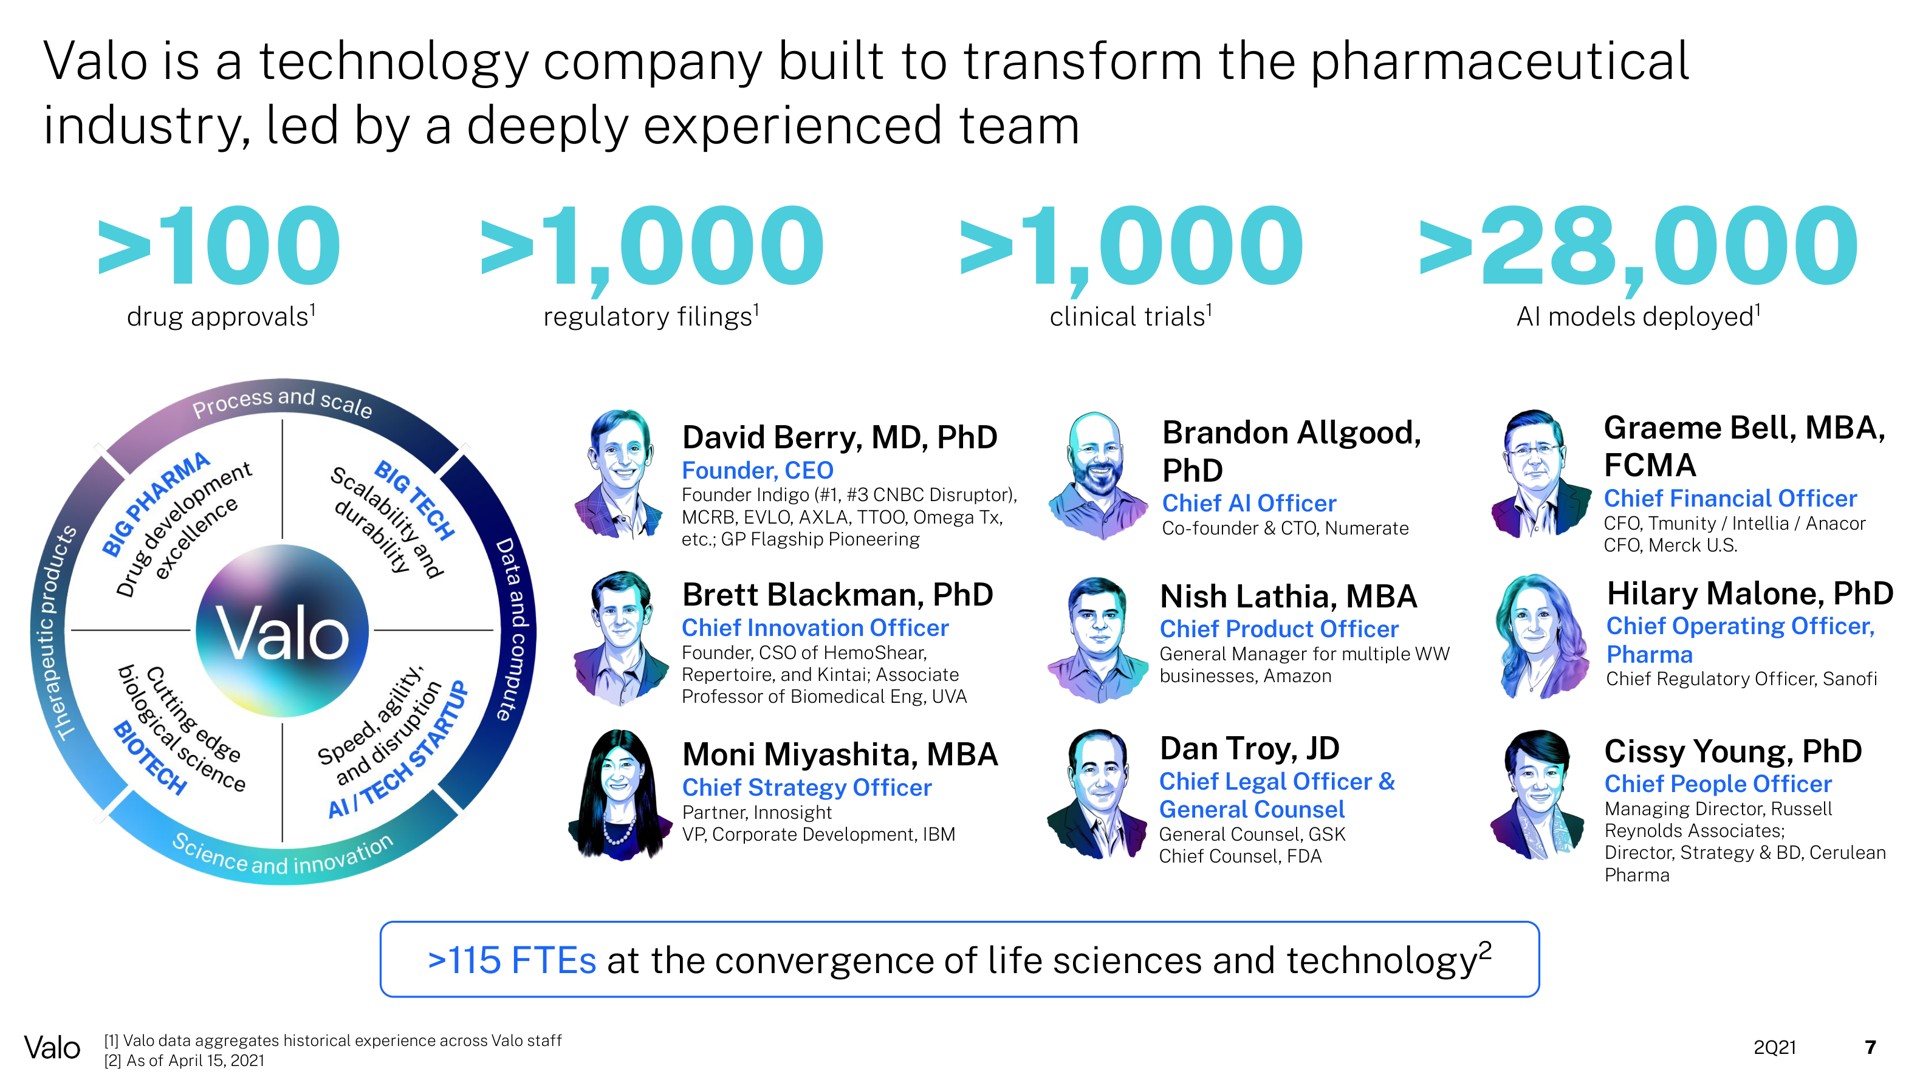 is a technology company built to transform the pharmaceutical industry led by a deeply experienced team | Valo